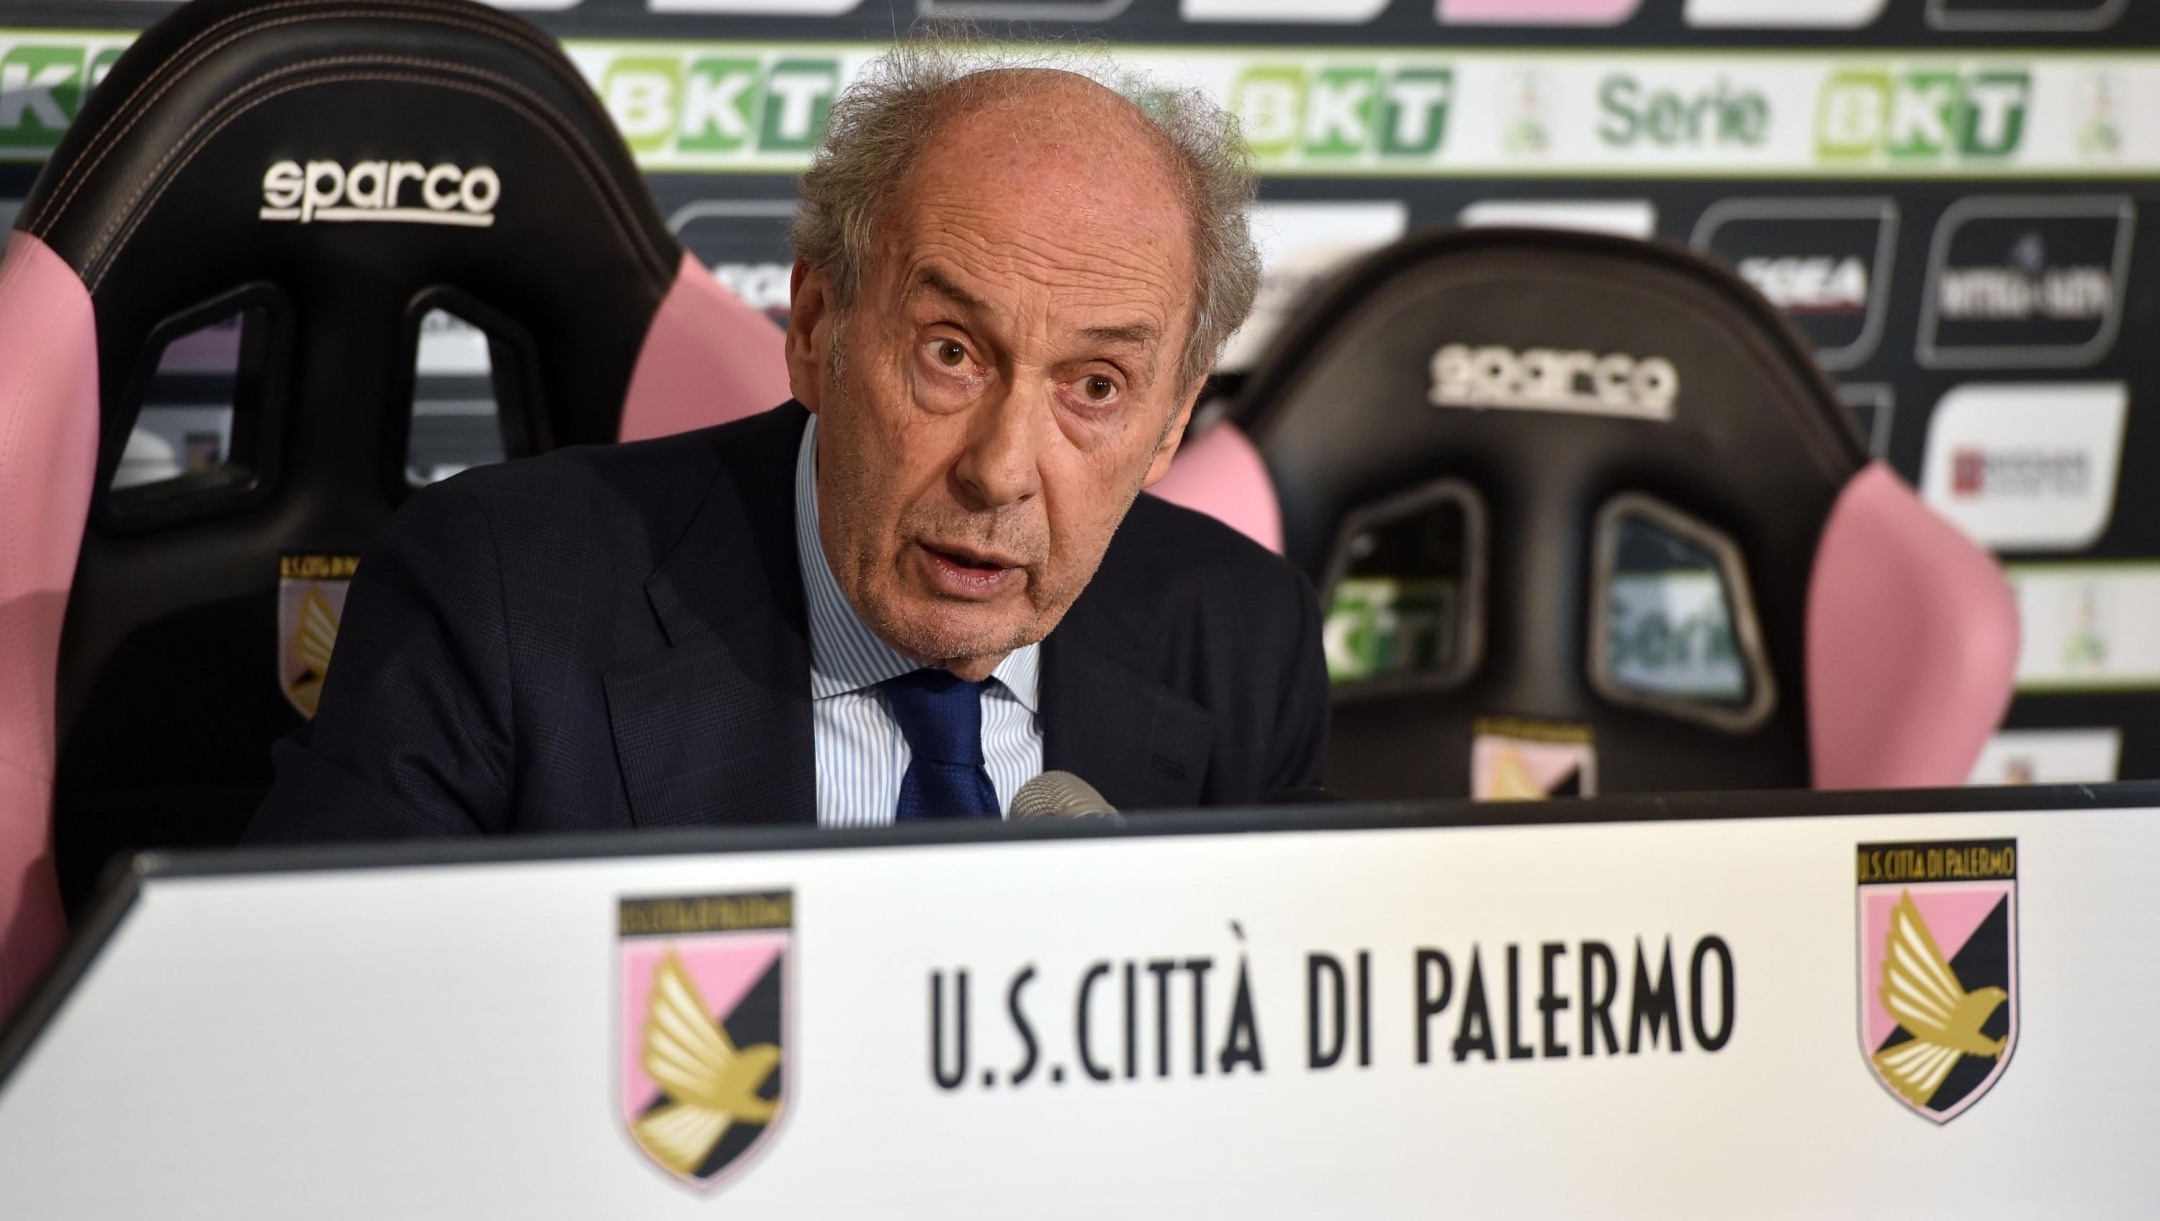 PALERMO, ITALY - MARCH 01: President Rino Foschi answers questions during presentation of Niklas Gunnarsson as new player of US Citta' di Palermo at Tenente Carmelo Onorato Sports Center on March 01, 2019 in Palermo, Italy. (Photo by Tullio M. Puglia/Getty Images)